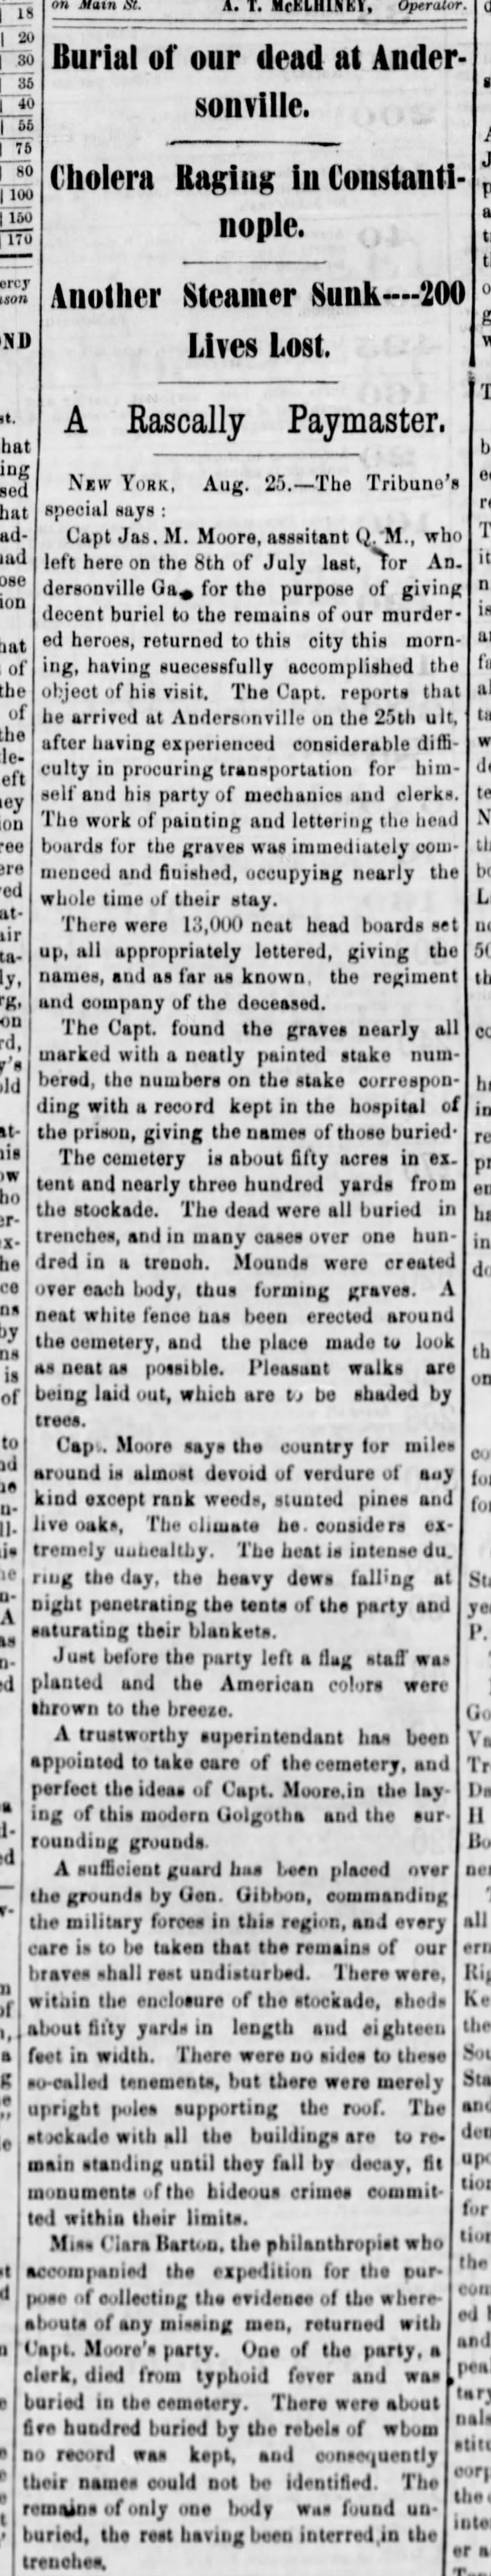 Union dead at Andersonville are identified and buried after the war; Clara Barton assists